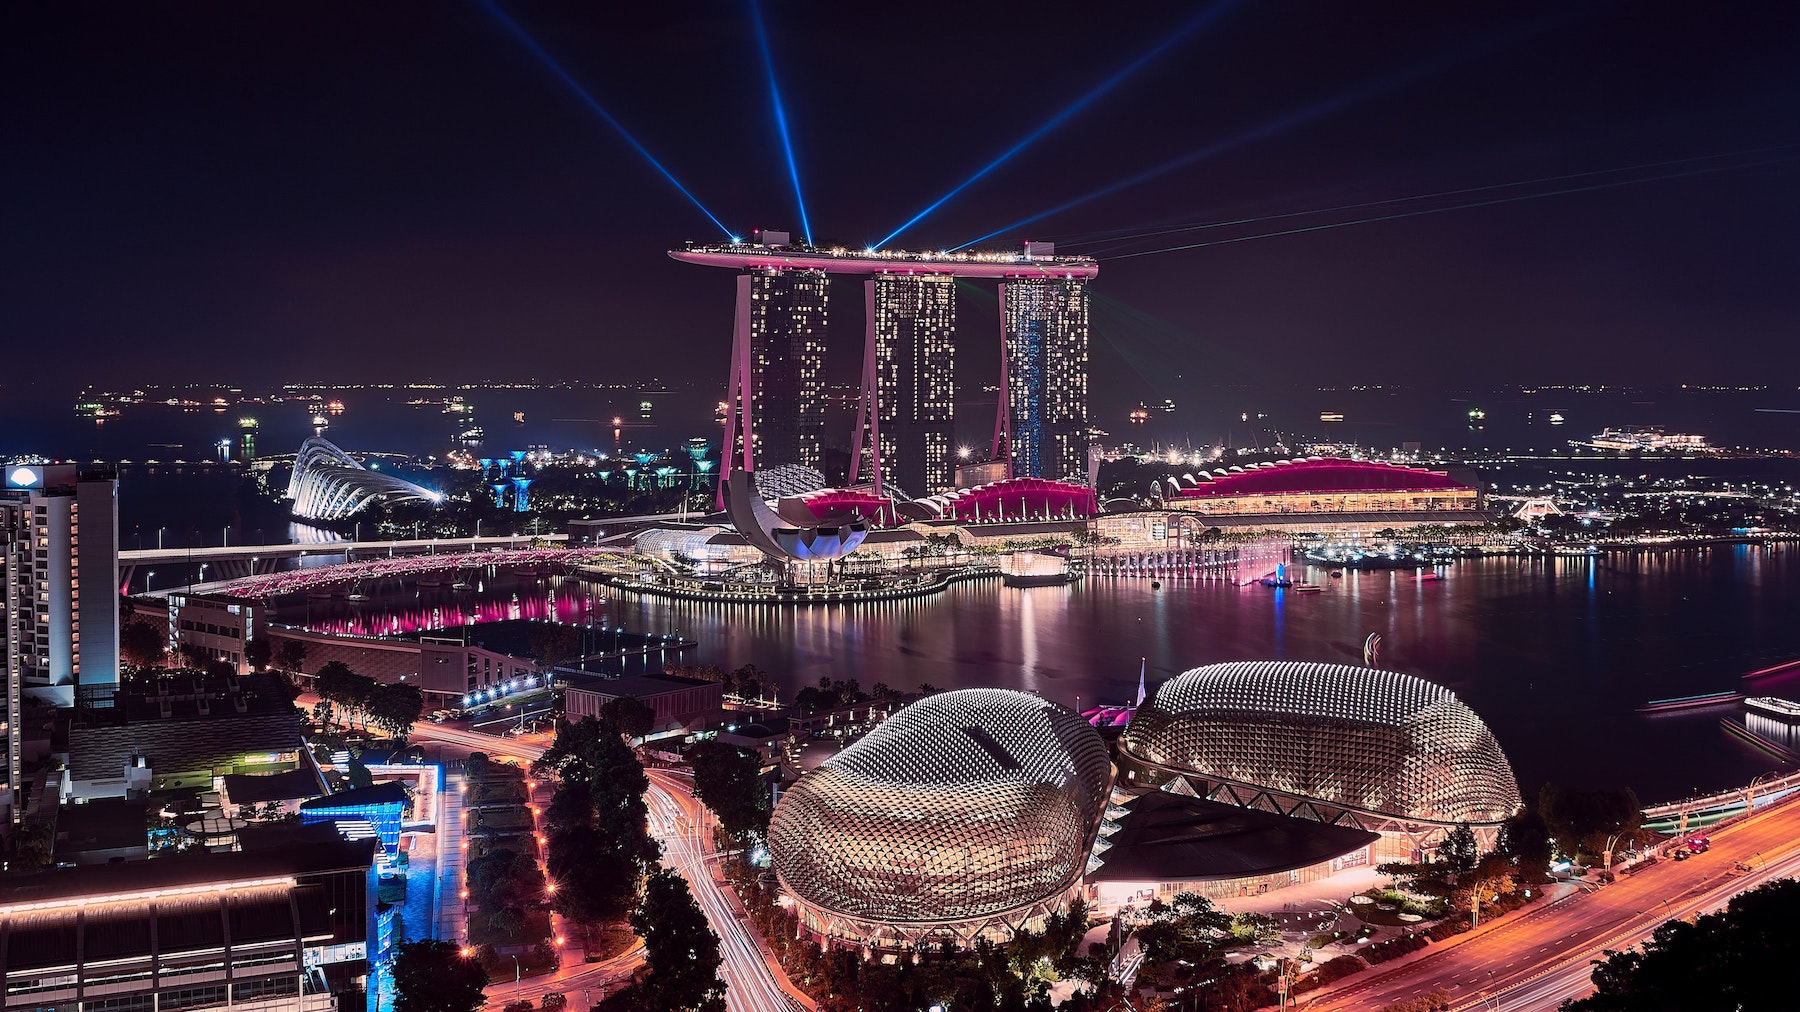 Once a local underdog, Anacle now leads smart city innovation in Singapore